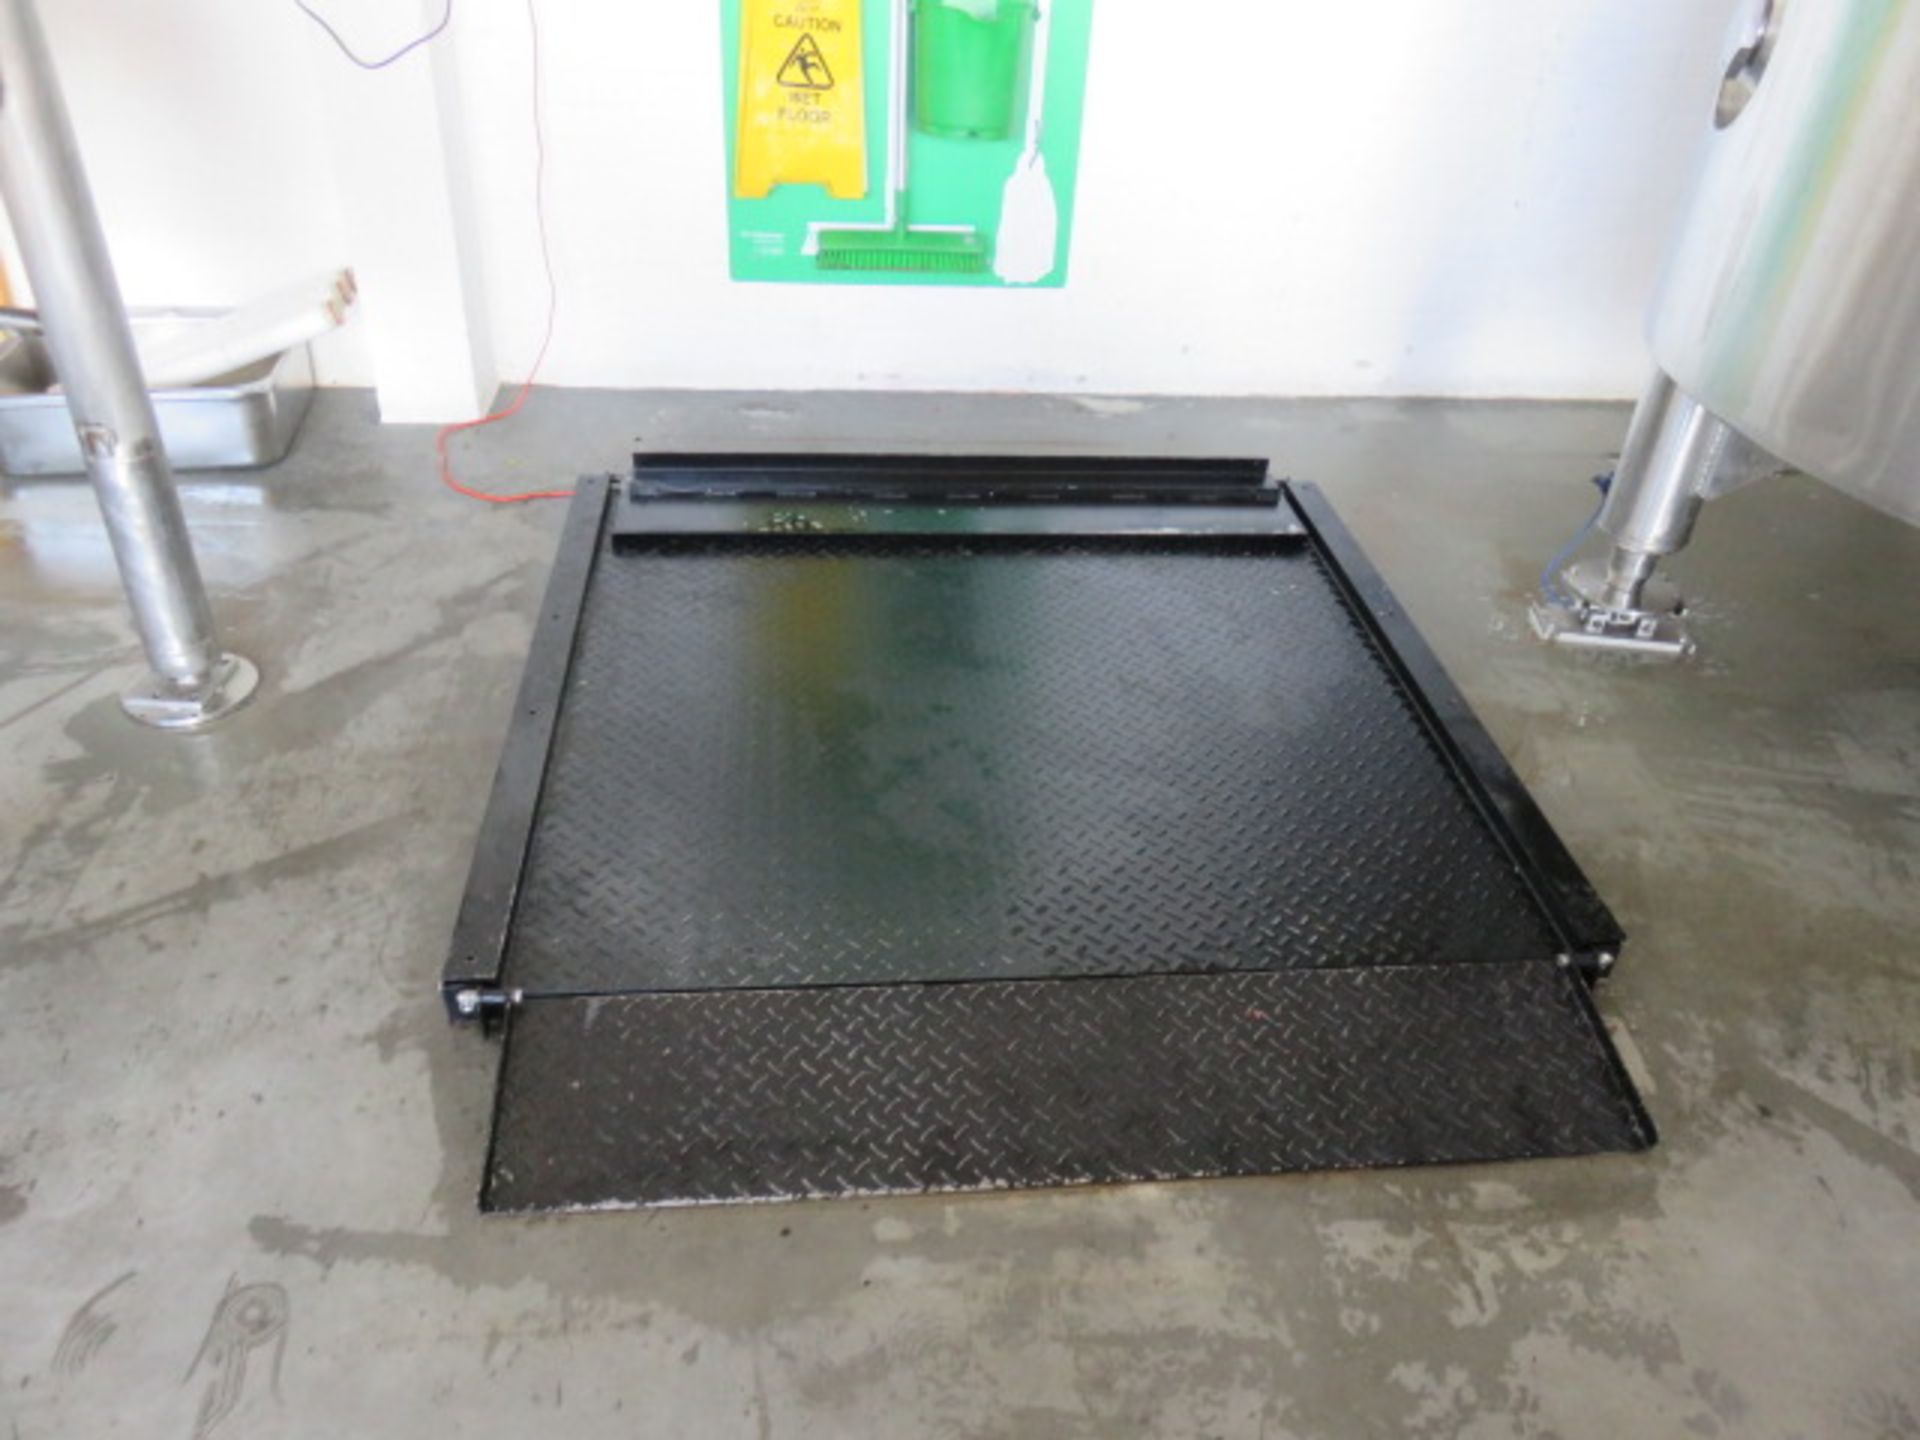 1, Marsden Platform Pallet Weigh Scale with 1-100SS Digital Read Out and 2000 kg Capacity - Image 2 of 2